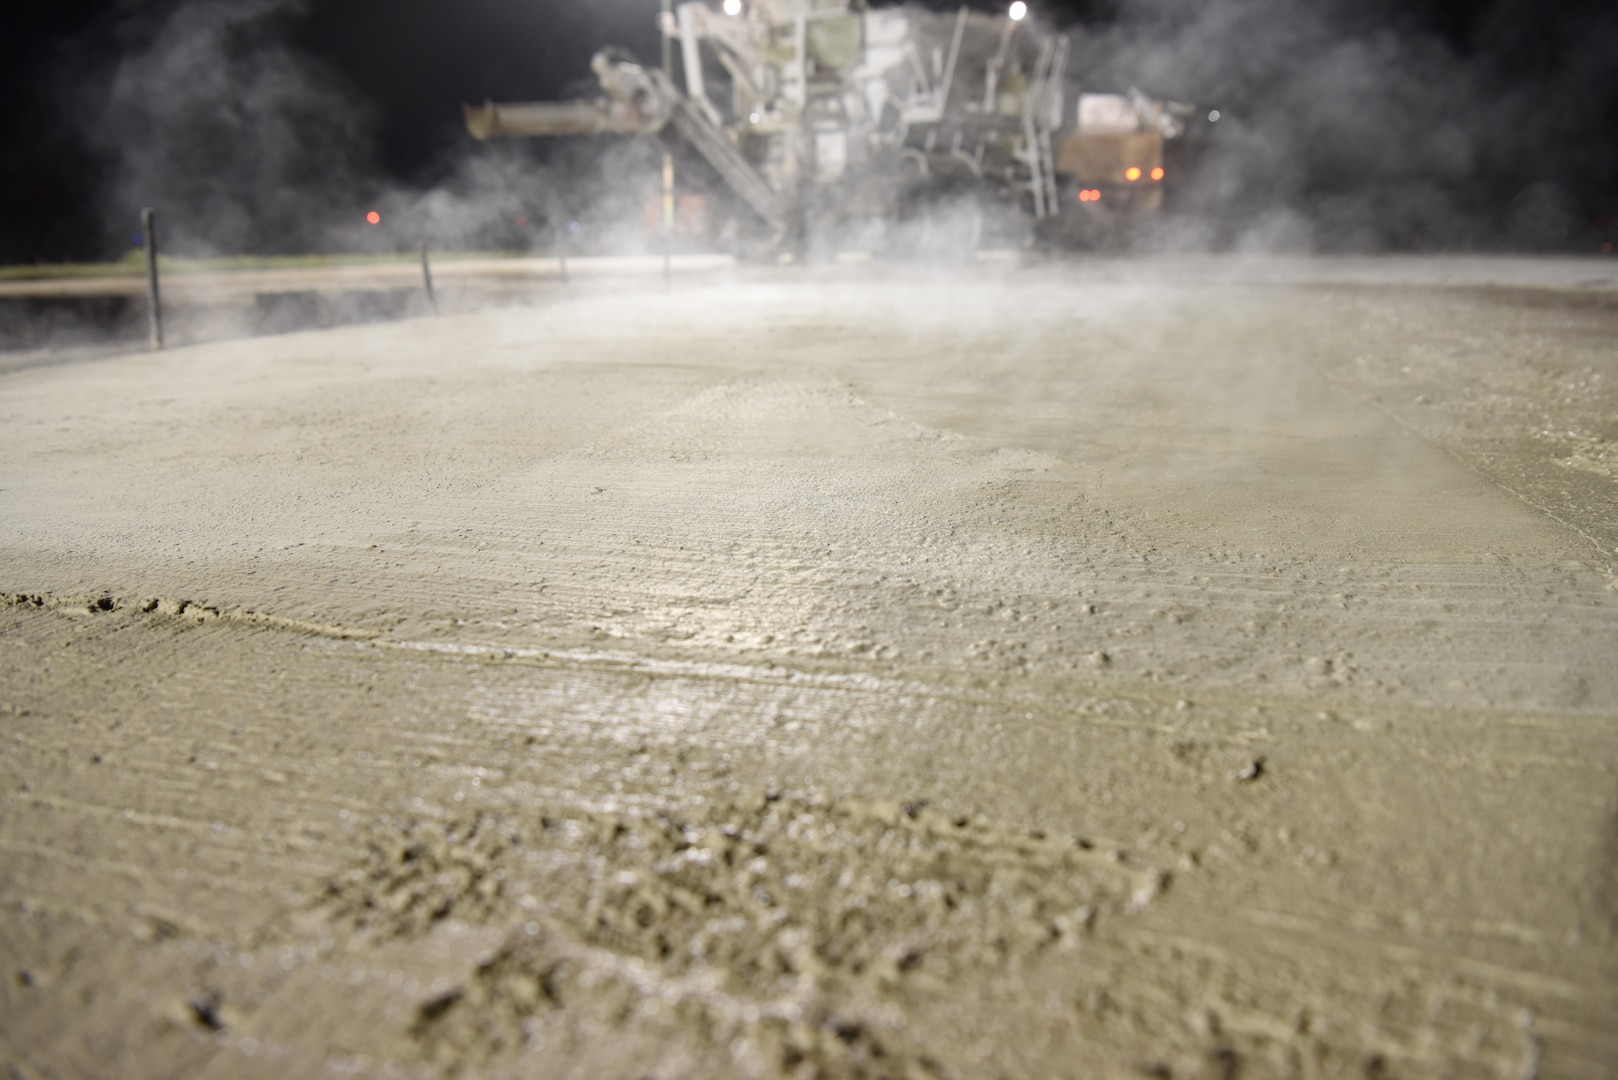 Concrete steams as it dries after runway repairs at Kunsan Air Base, Republic of Korea, May 2, 2019. The U.S. Air Force 8th Civil Engineer Squadron conducted a rapid response to a rupture that opened on the runway, and repaired the flight line within 24 hours. (U.S. Air Force photo by Staff Sgt. Joshua Edwards)